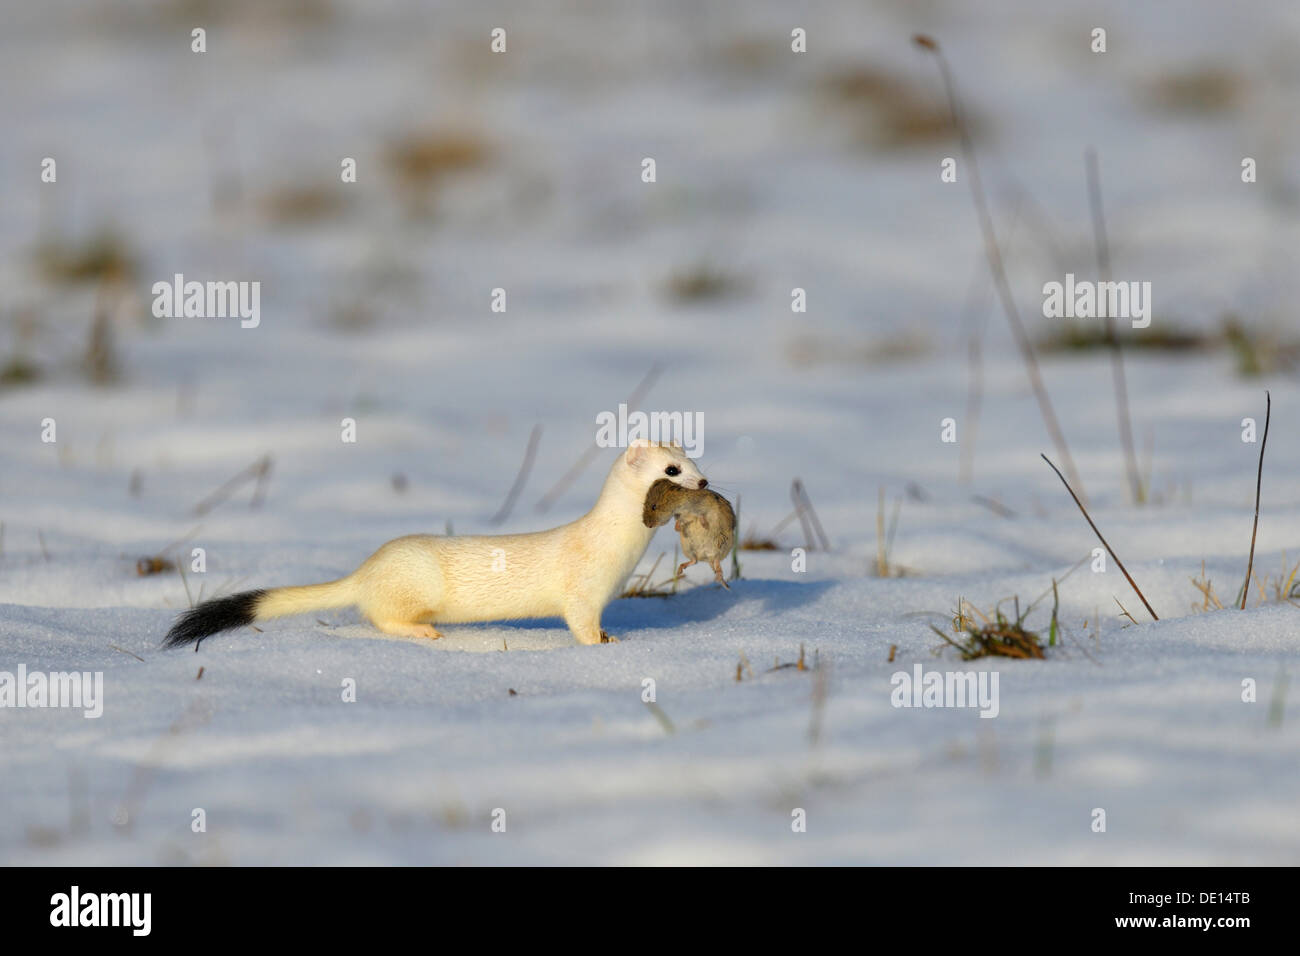 Stoat or Ermine (Mustela erminea) in its winter coat with prey, a Common Vole (Microtus arvalis), biosphere reserve, Swabian Alb Stock Photo